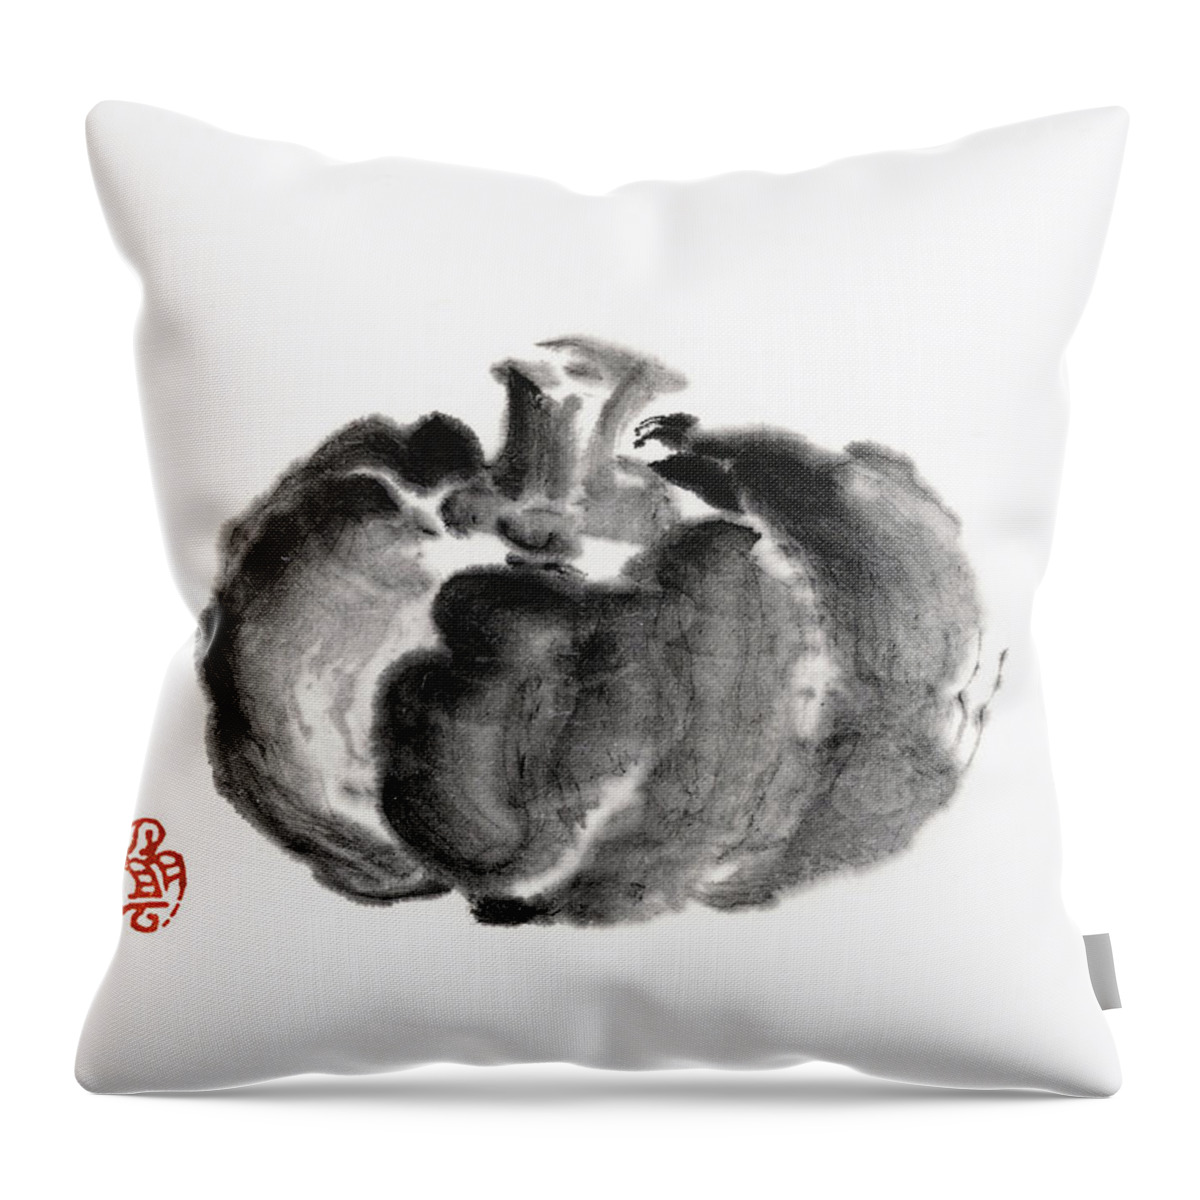 Ink And Brush Throw Pillow featuring the digital art Pumpkin by Daj